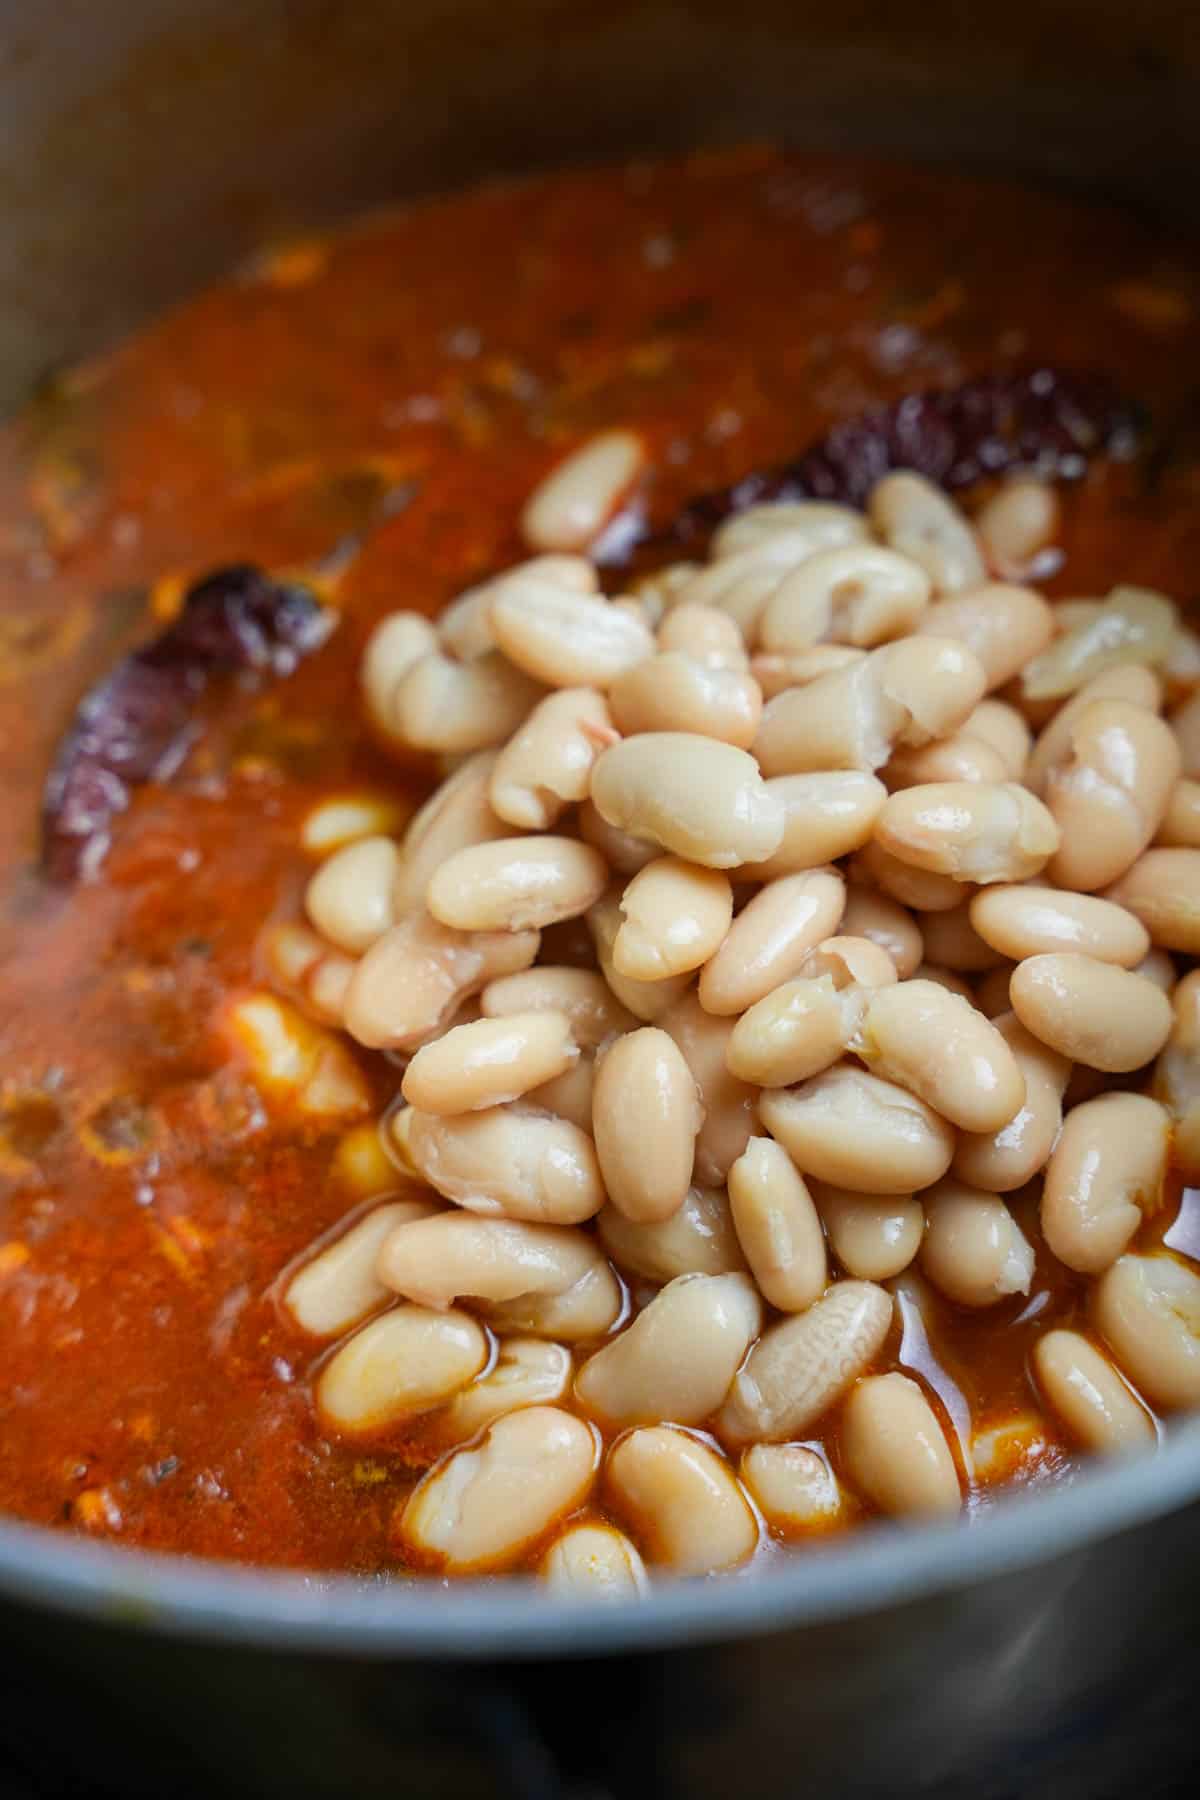 Once the stew is cooked and thick, cooked white beans are stirred into the stew base in the pot.